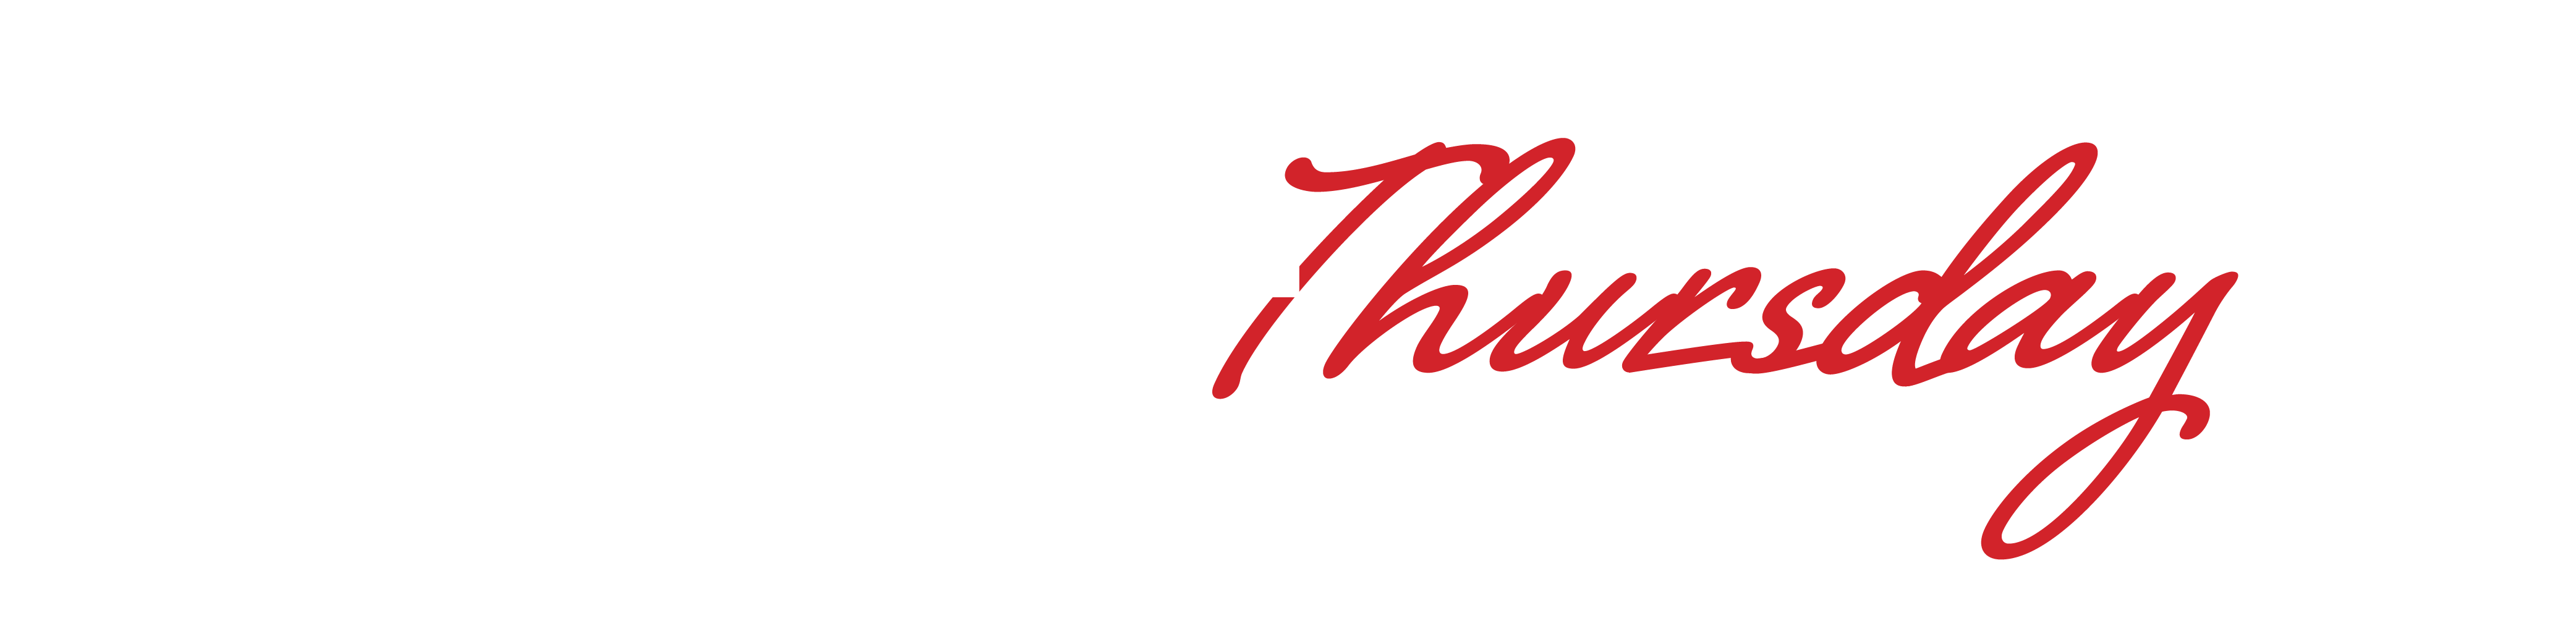 PE-CT-Website-Graphic-ID-Logo-Cathouse-Thursday-White-Red-575x144